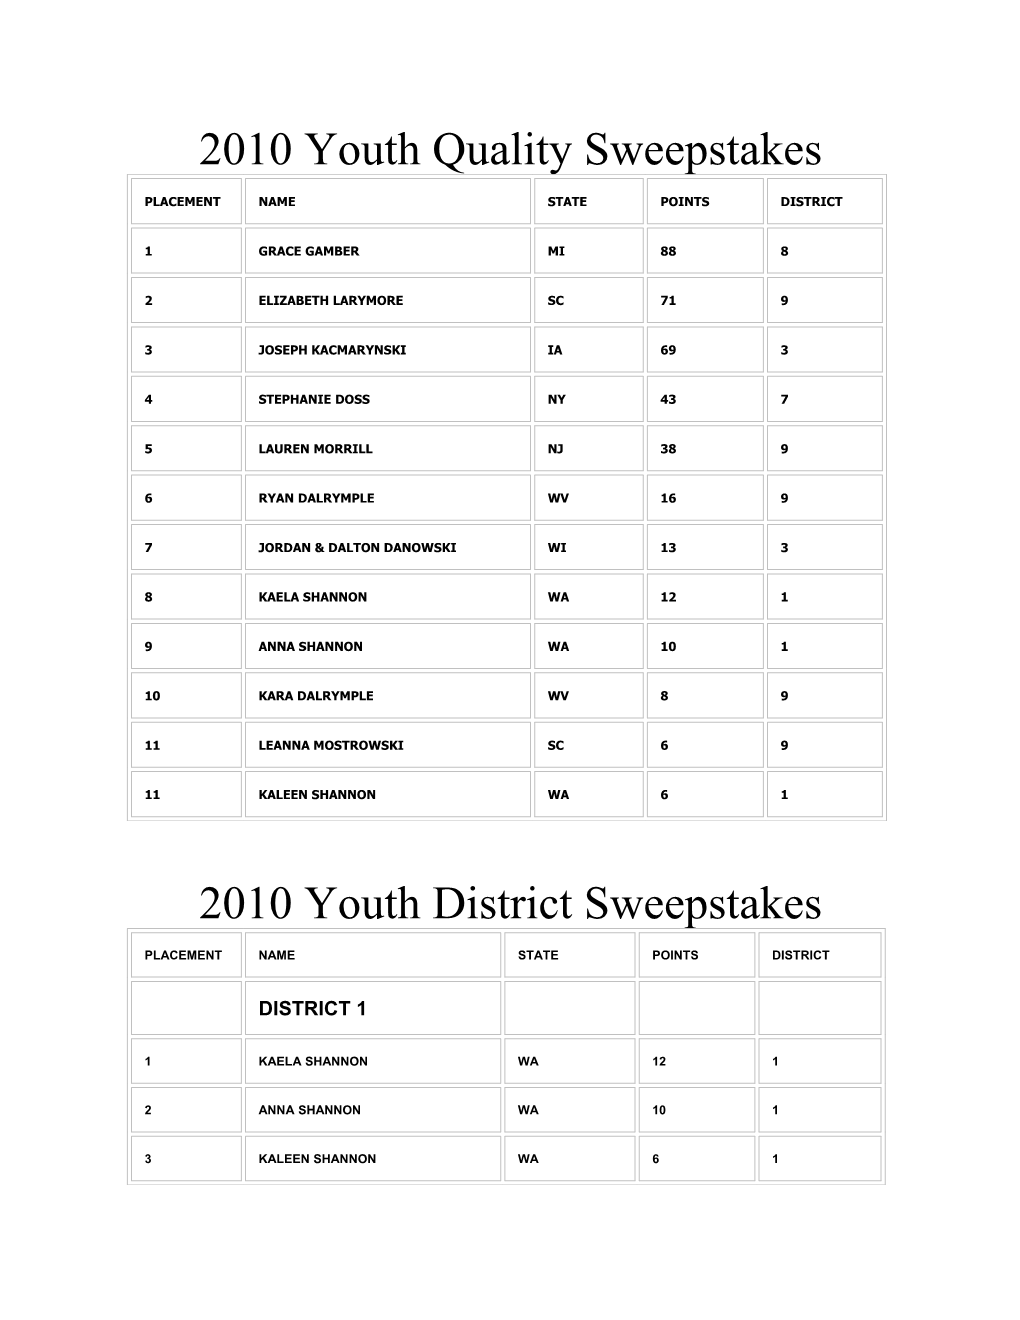 2010 Youth Quality Sweepstakes